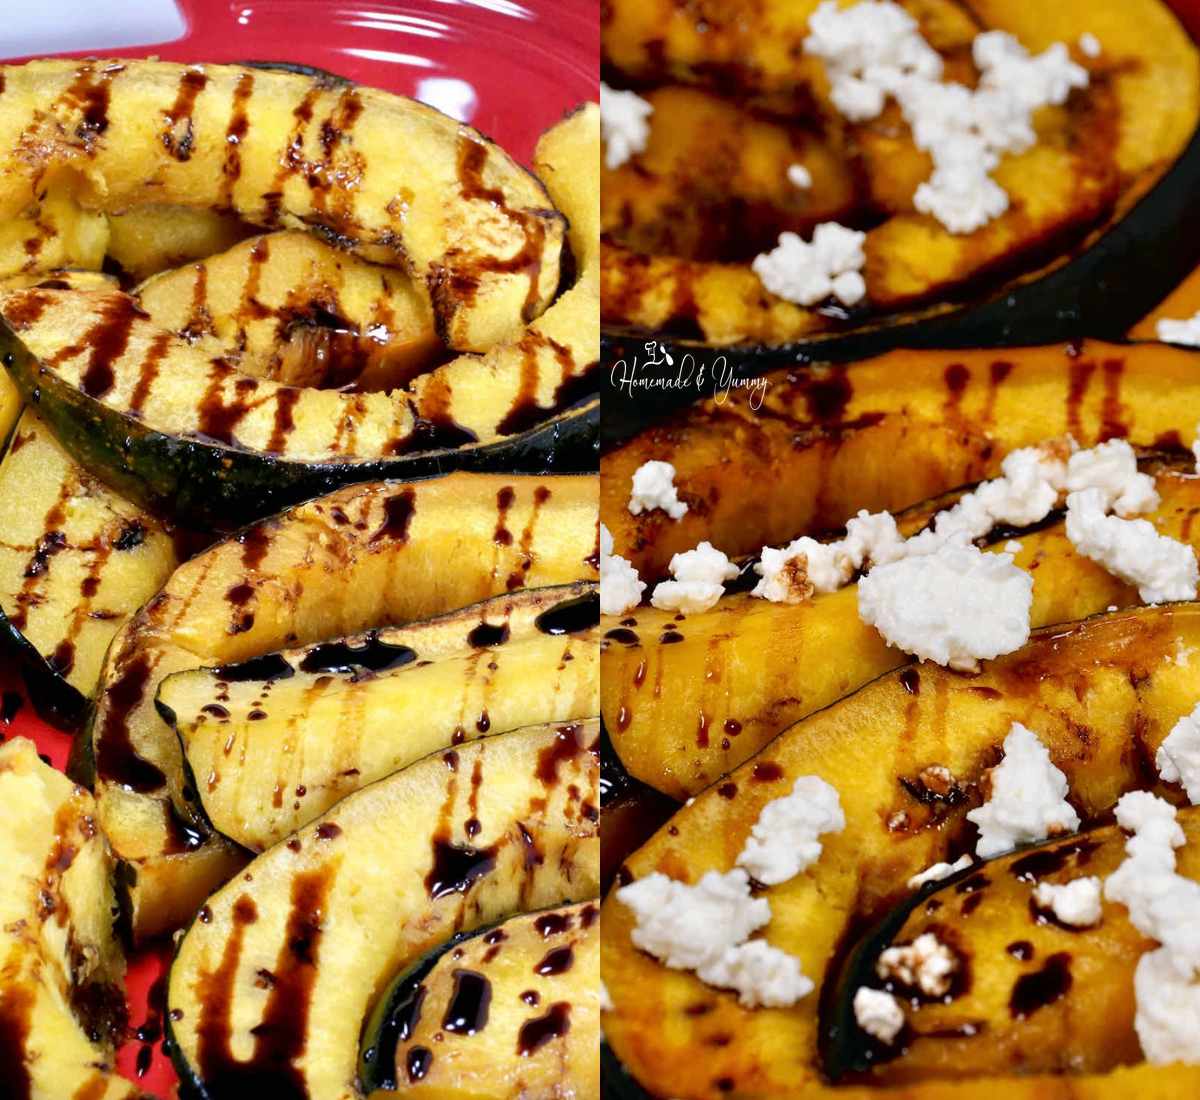 Acorn squash roasted with balsamic and feta.